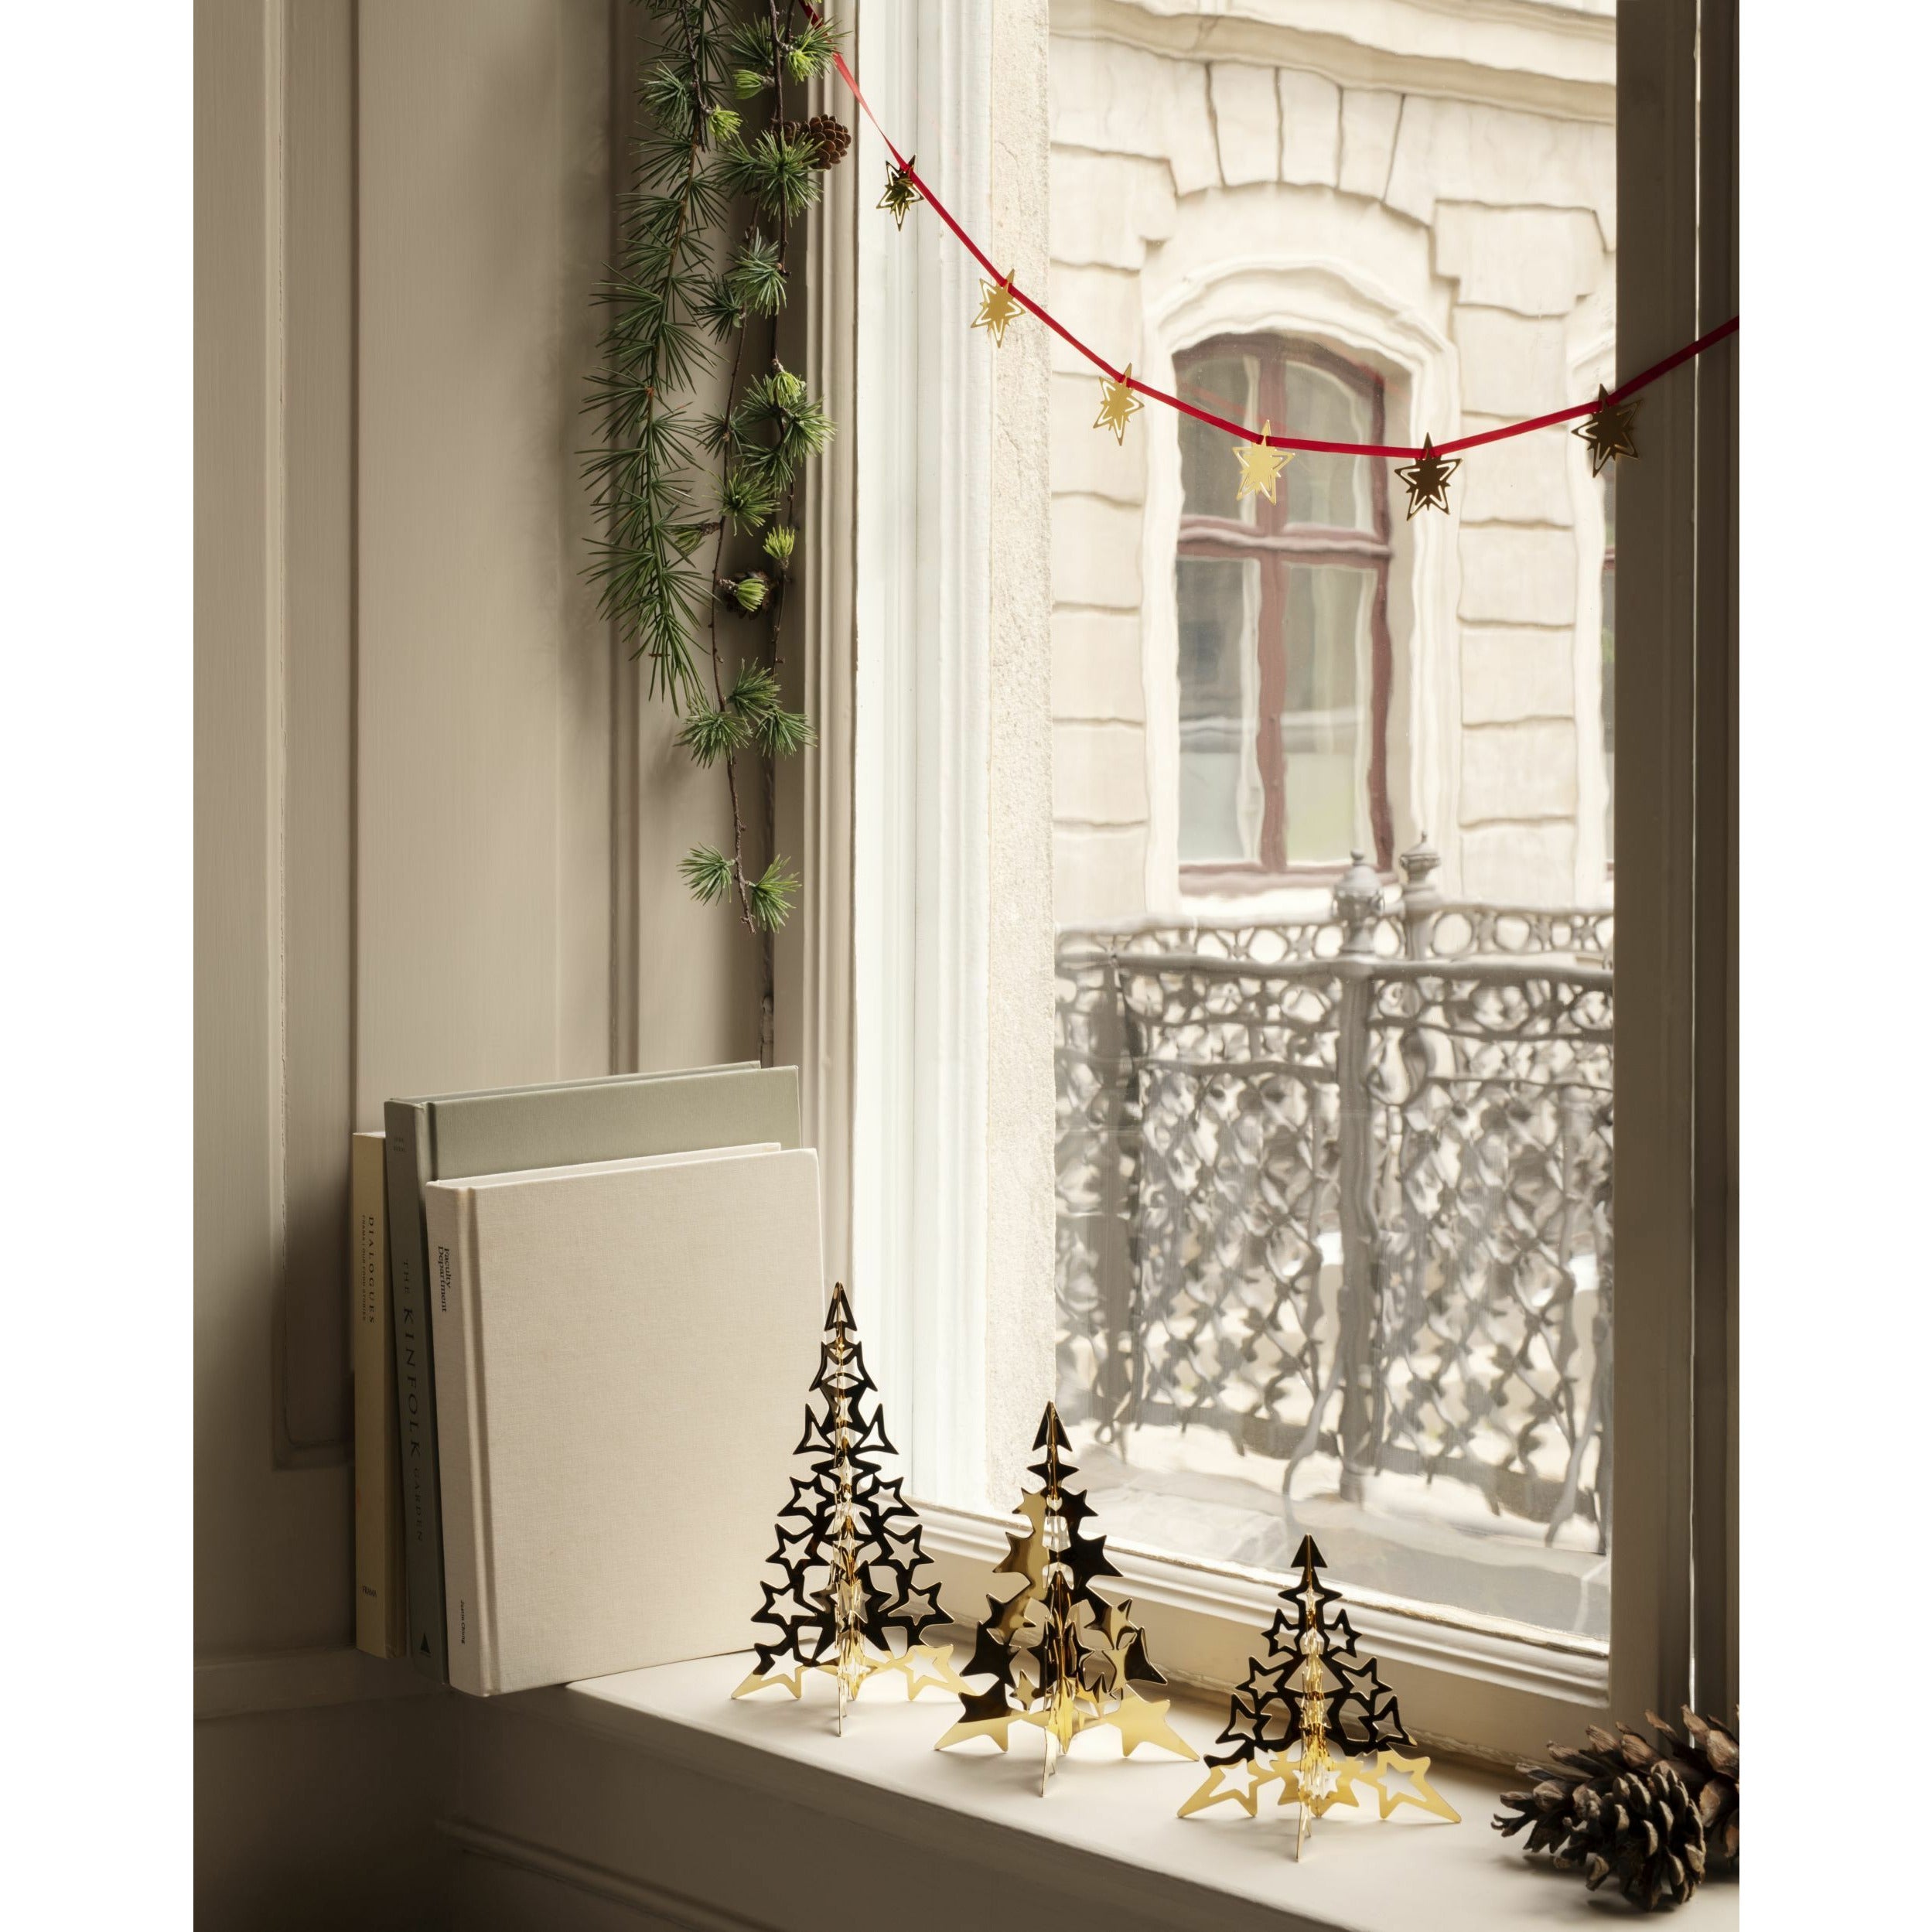 Georg Jensen Classic Christmas Star Garland, 1 m rouge, plaqué or